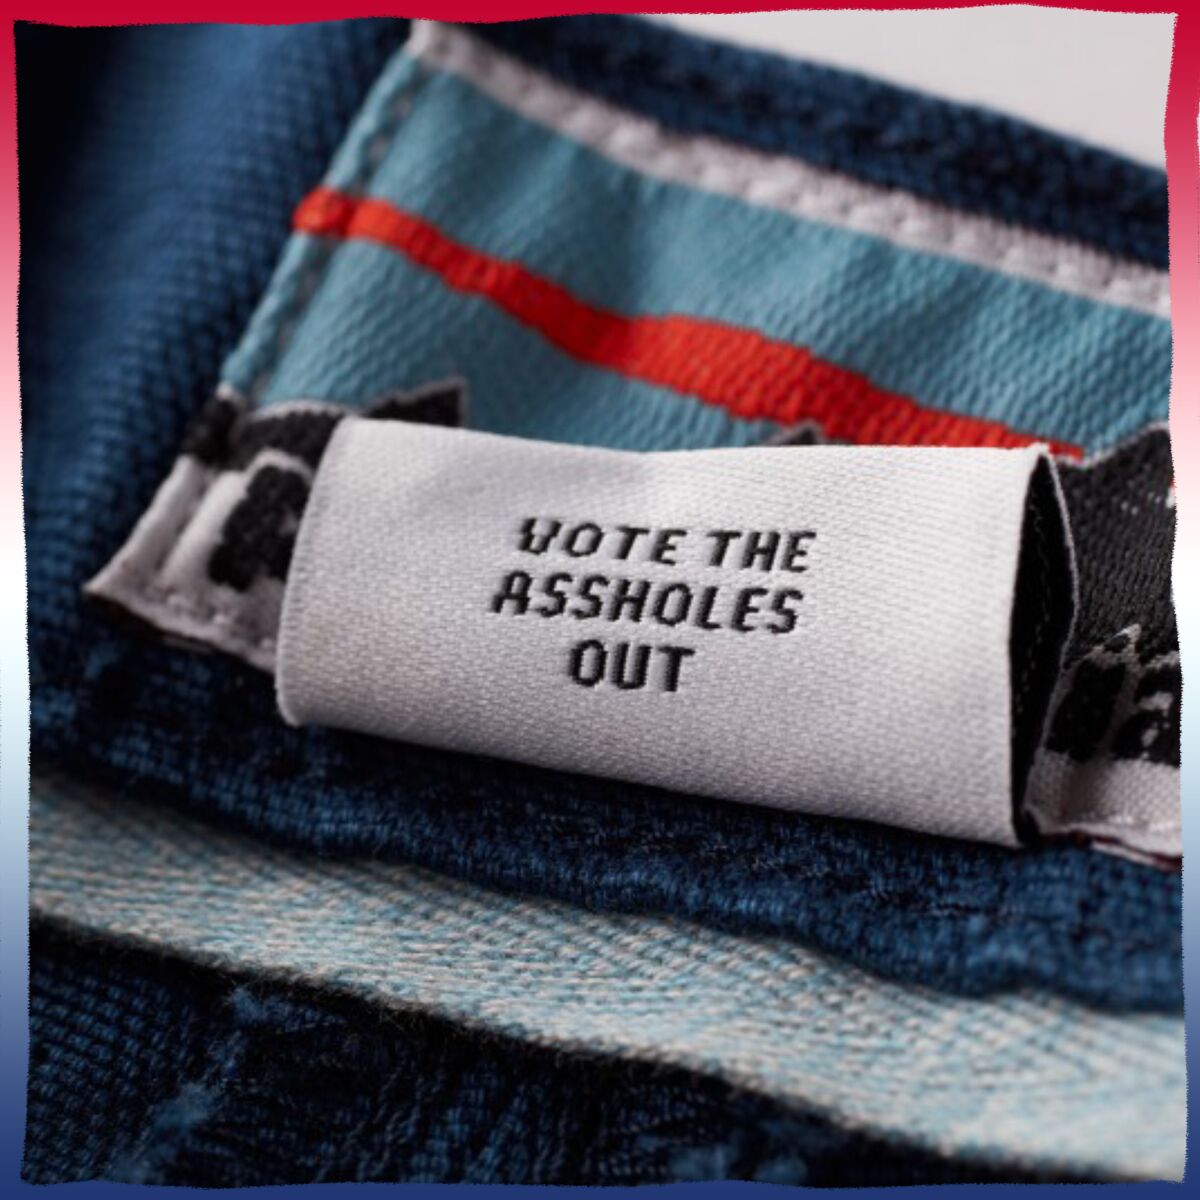 Patagonia shorts carry a label that says "Vote the assholes out."